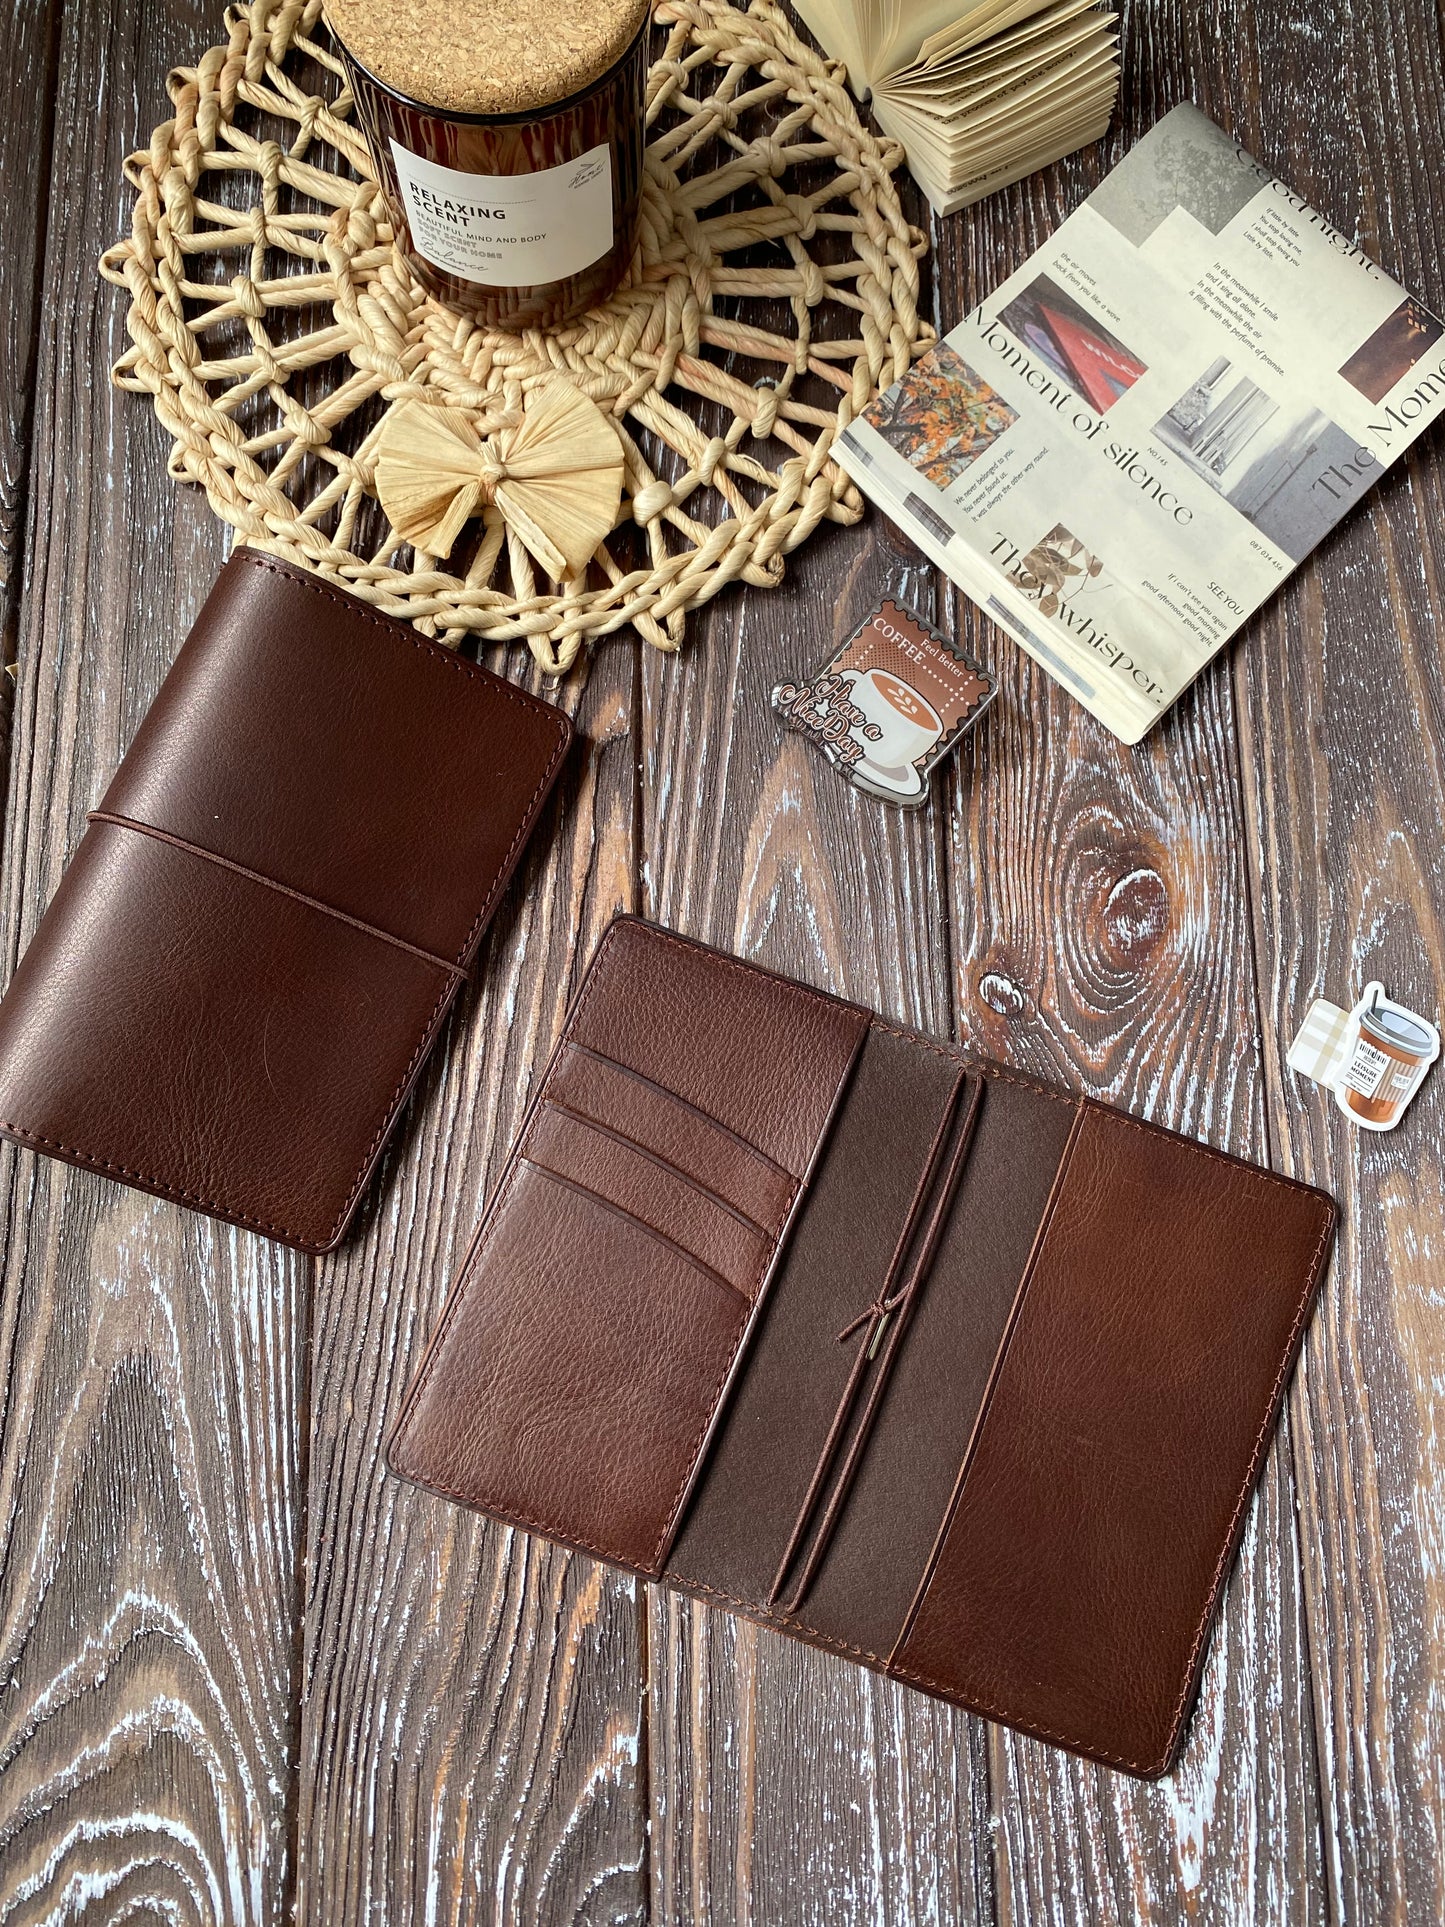 Moleskine Pocket TN CAHIER or Filed Notes leather cover